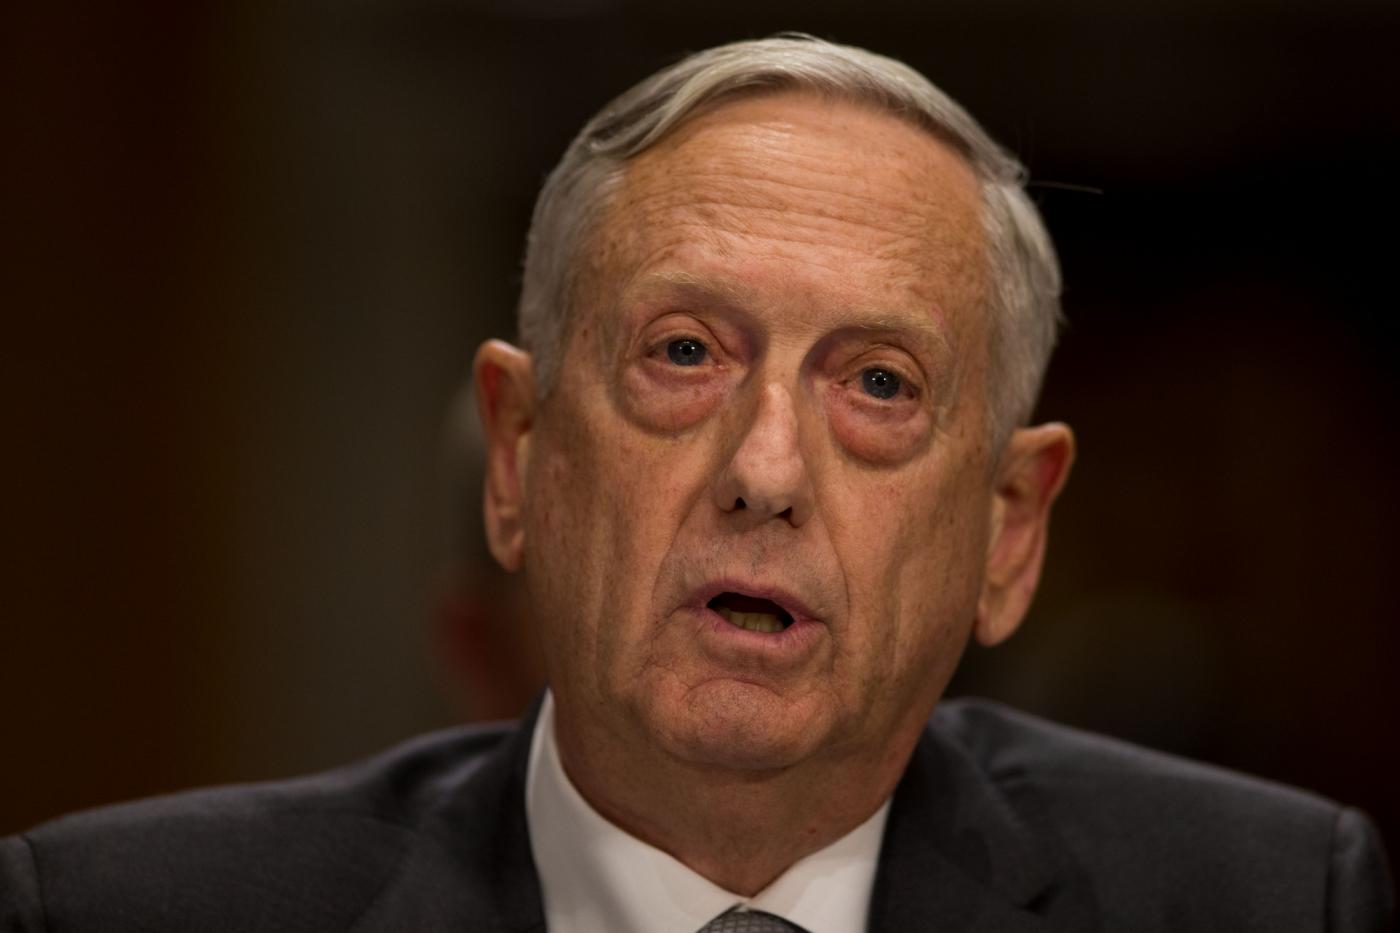 WASHINGTON, Oct. 31, 2017 (Xinhua) -- U.S. Defense Secretary Jim Mattis testifies to the Senate Foreign Relations Committee regarding authorizations for the Use of Military Force on Capitol hill in Washington D.C., the United States, on Oct. 30, 2017. (Xinhua/Ting Shen/IANS) by .